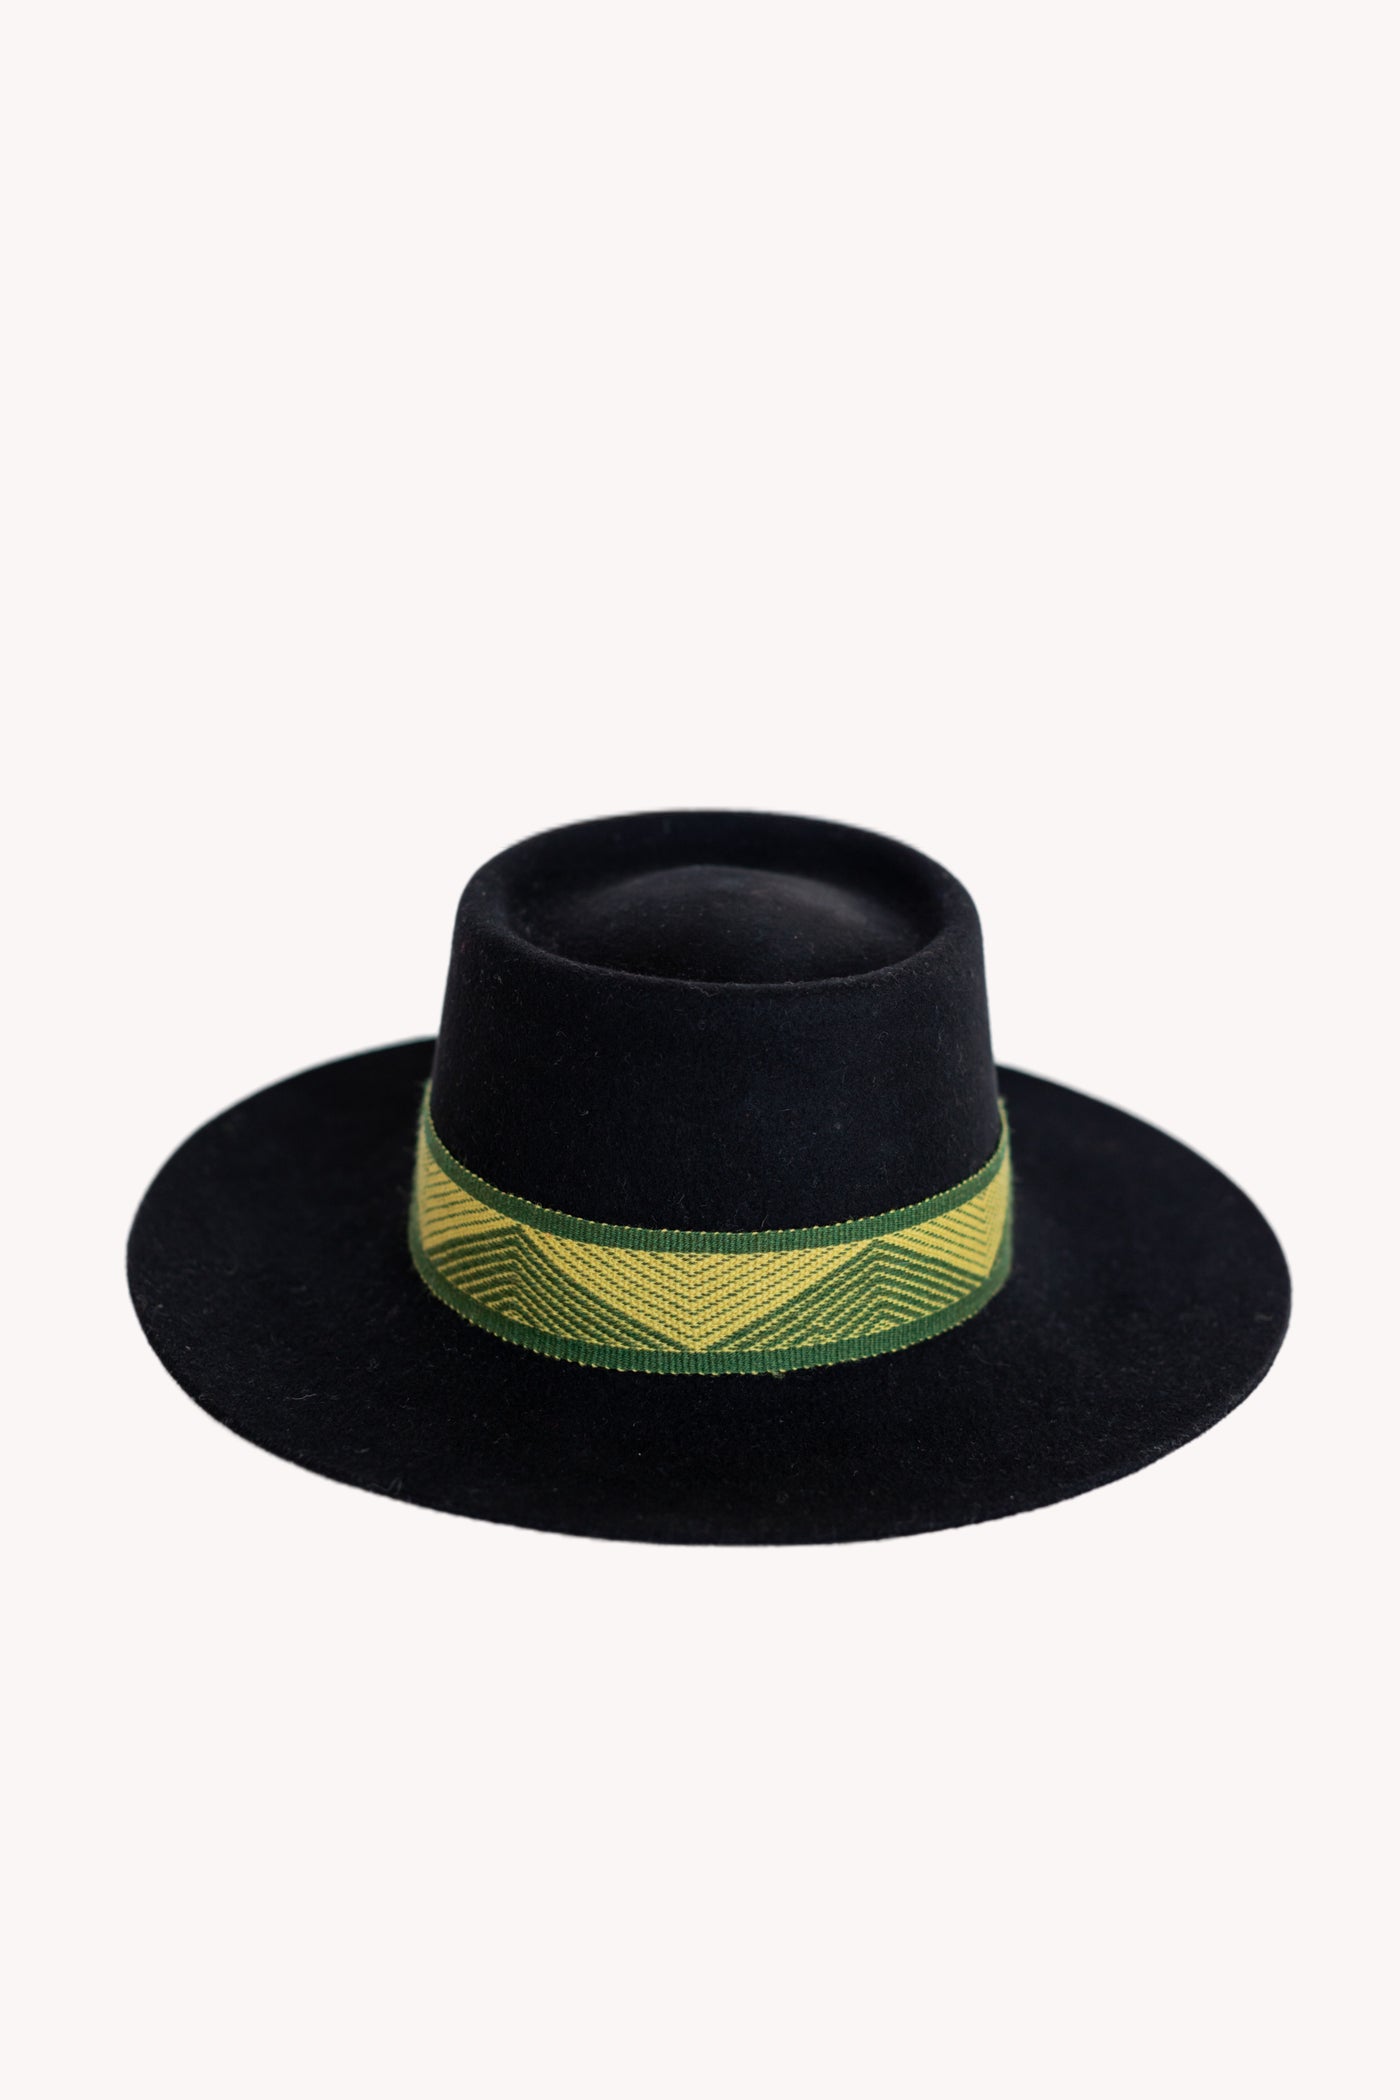 Black Bucket Hat with Green Band, Power Intention Band  Removable Intention Hat Textile Band